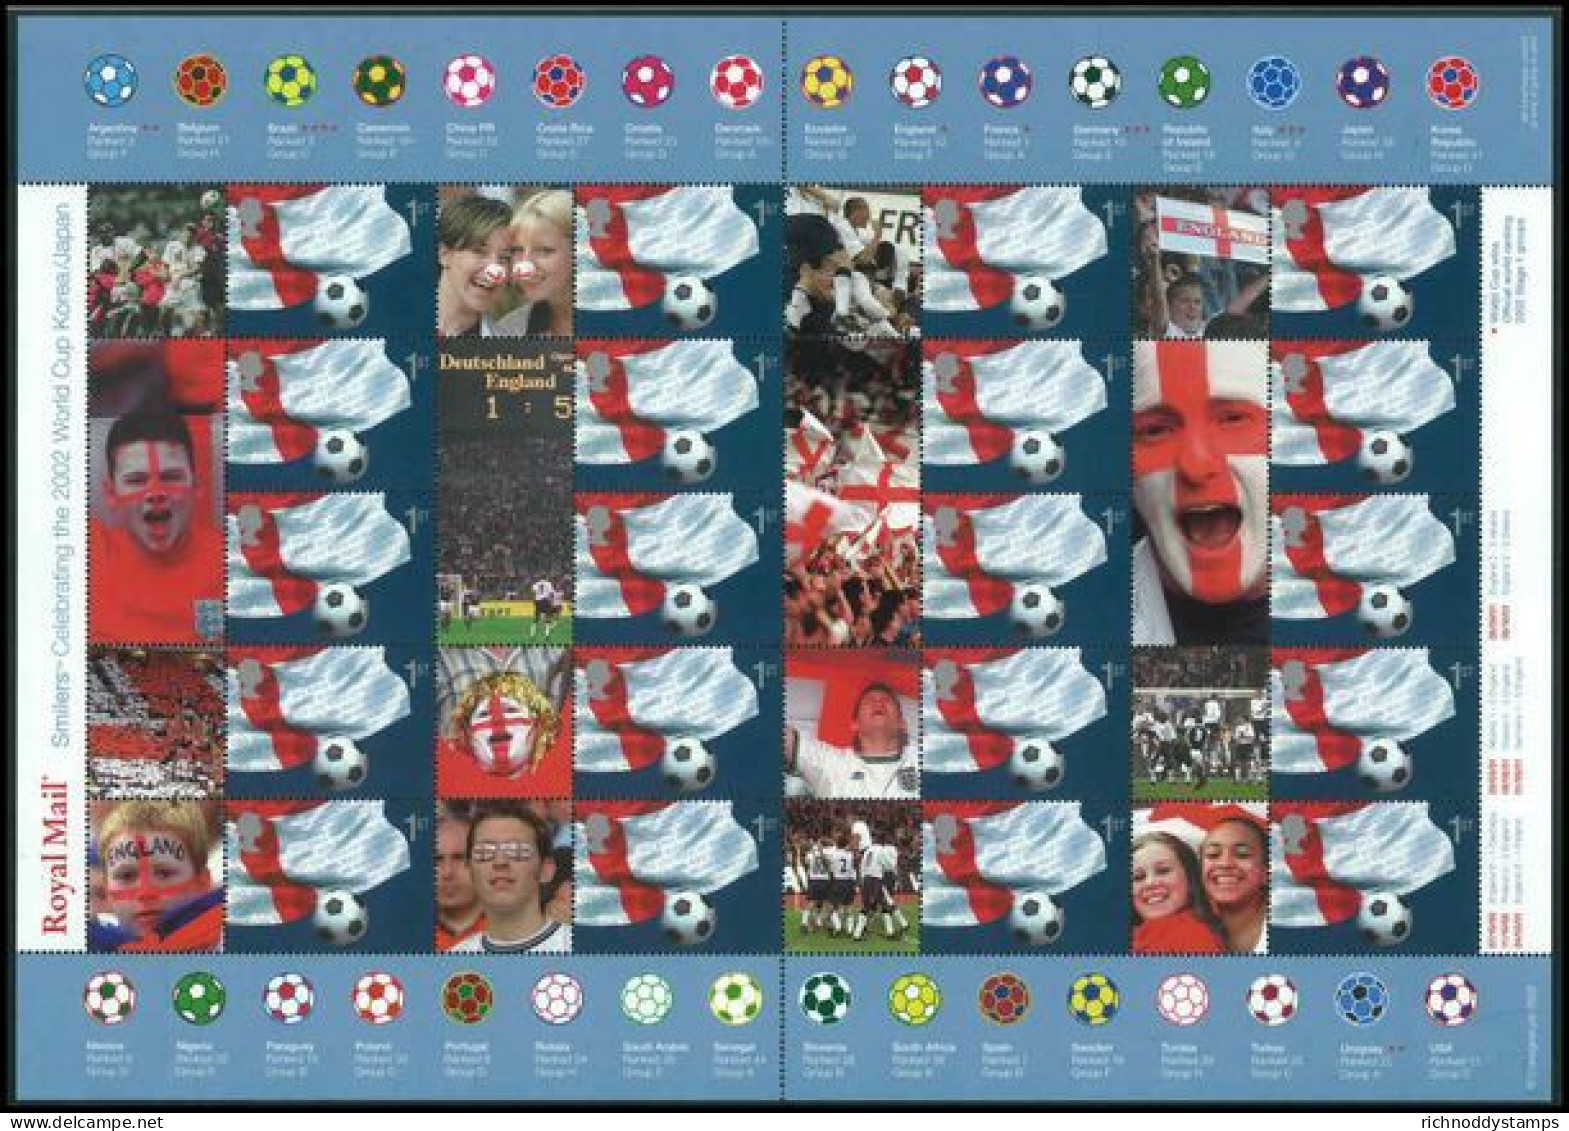 2002 Football World Cup Smilers Sheet Unmounted Mint. Imprinted Consignia Plc 2002unmounted Mint - Smilers Sheets